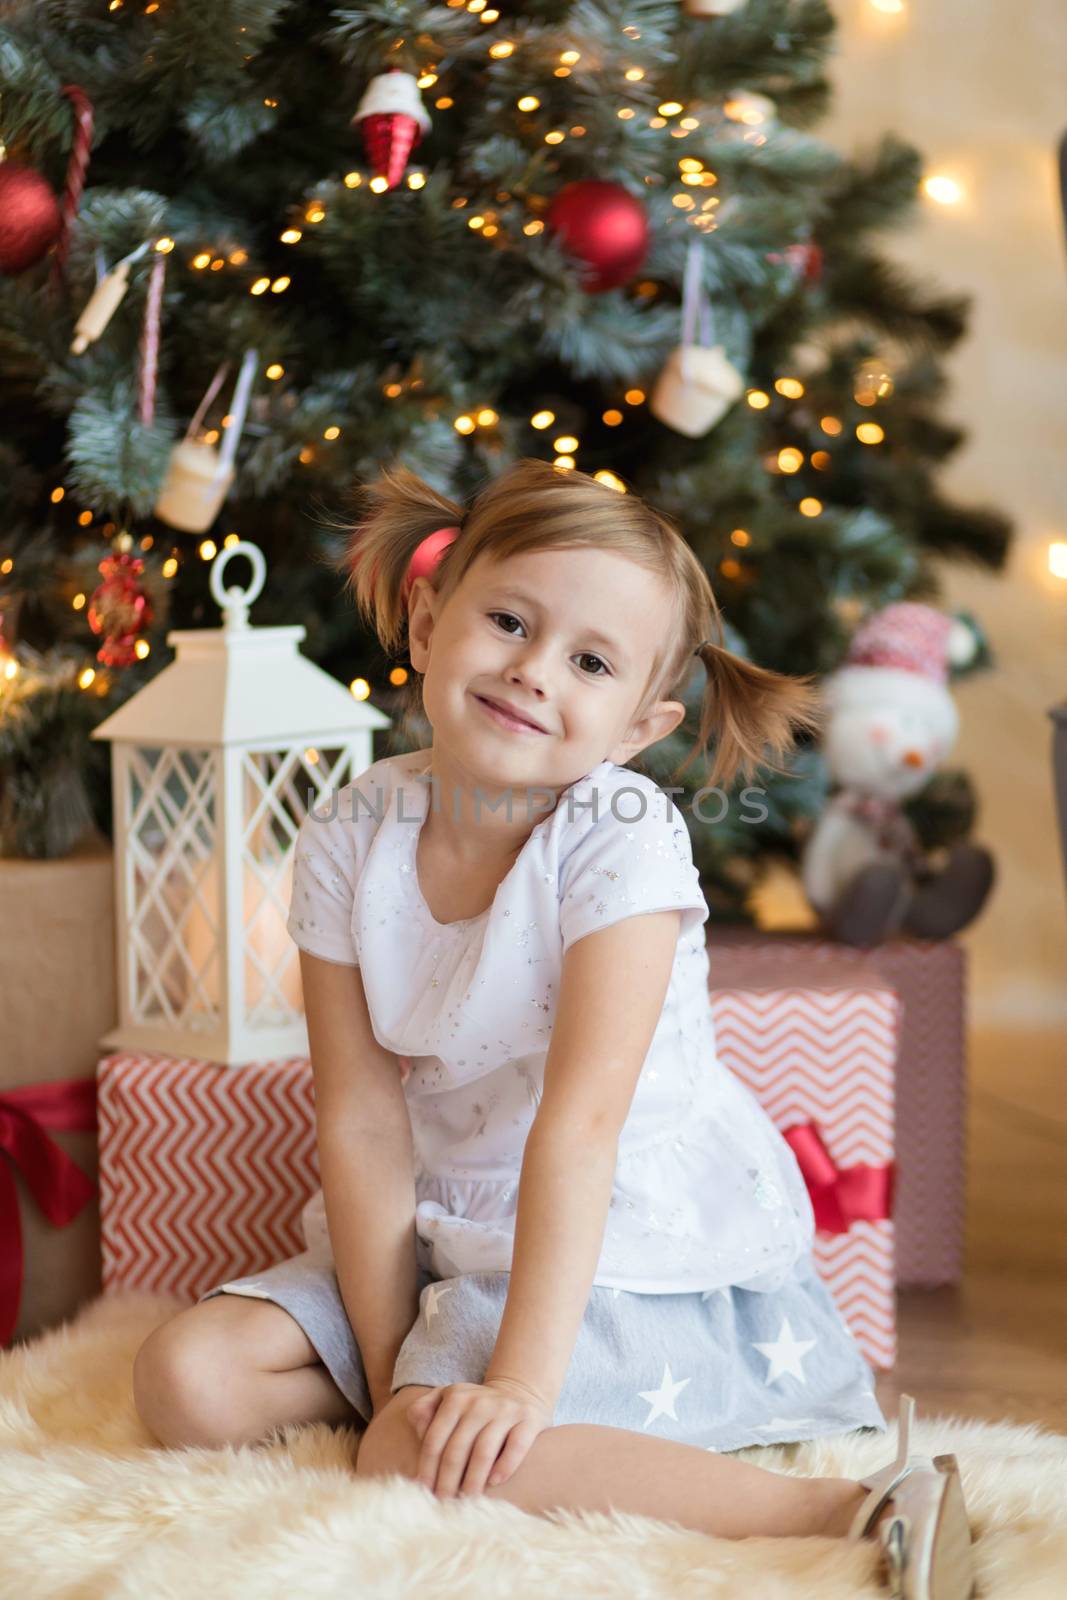 Pretty little child is sitting in front of christmas tree among garlands by galinasharapova